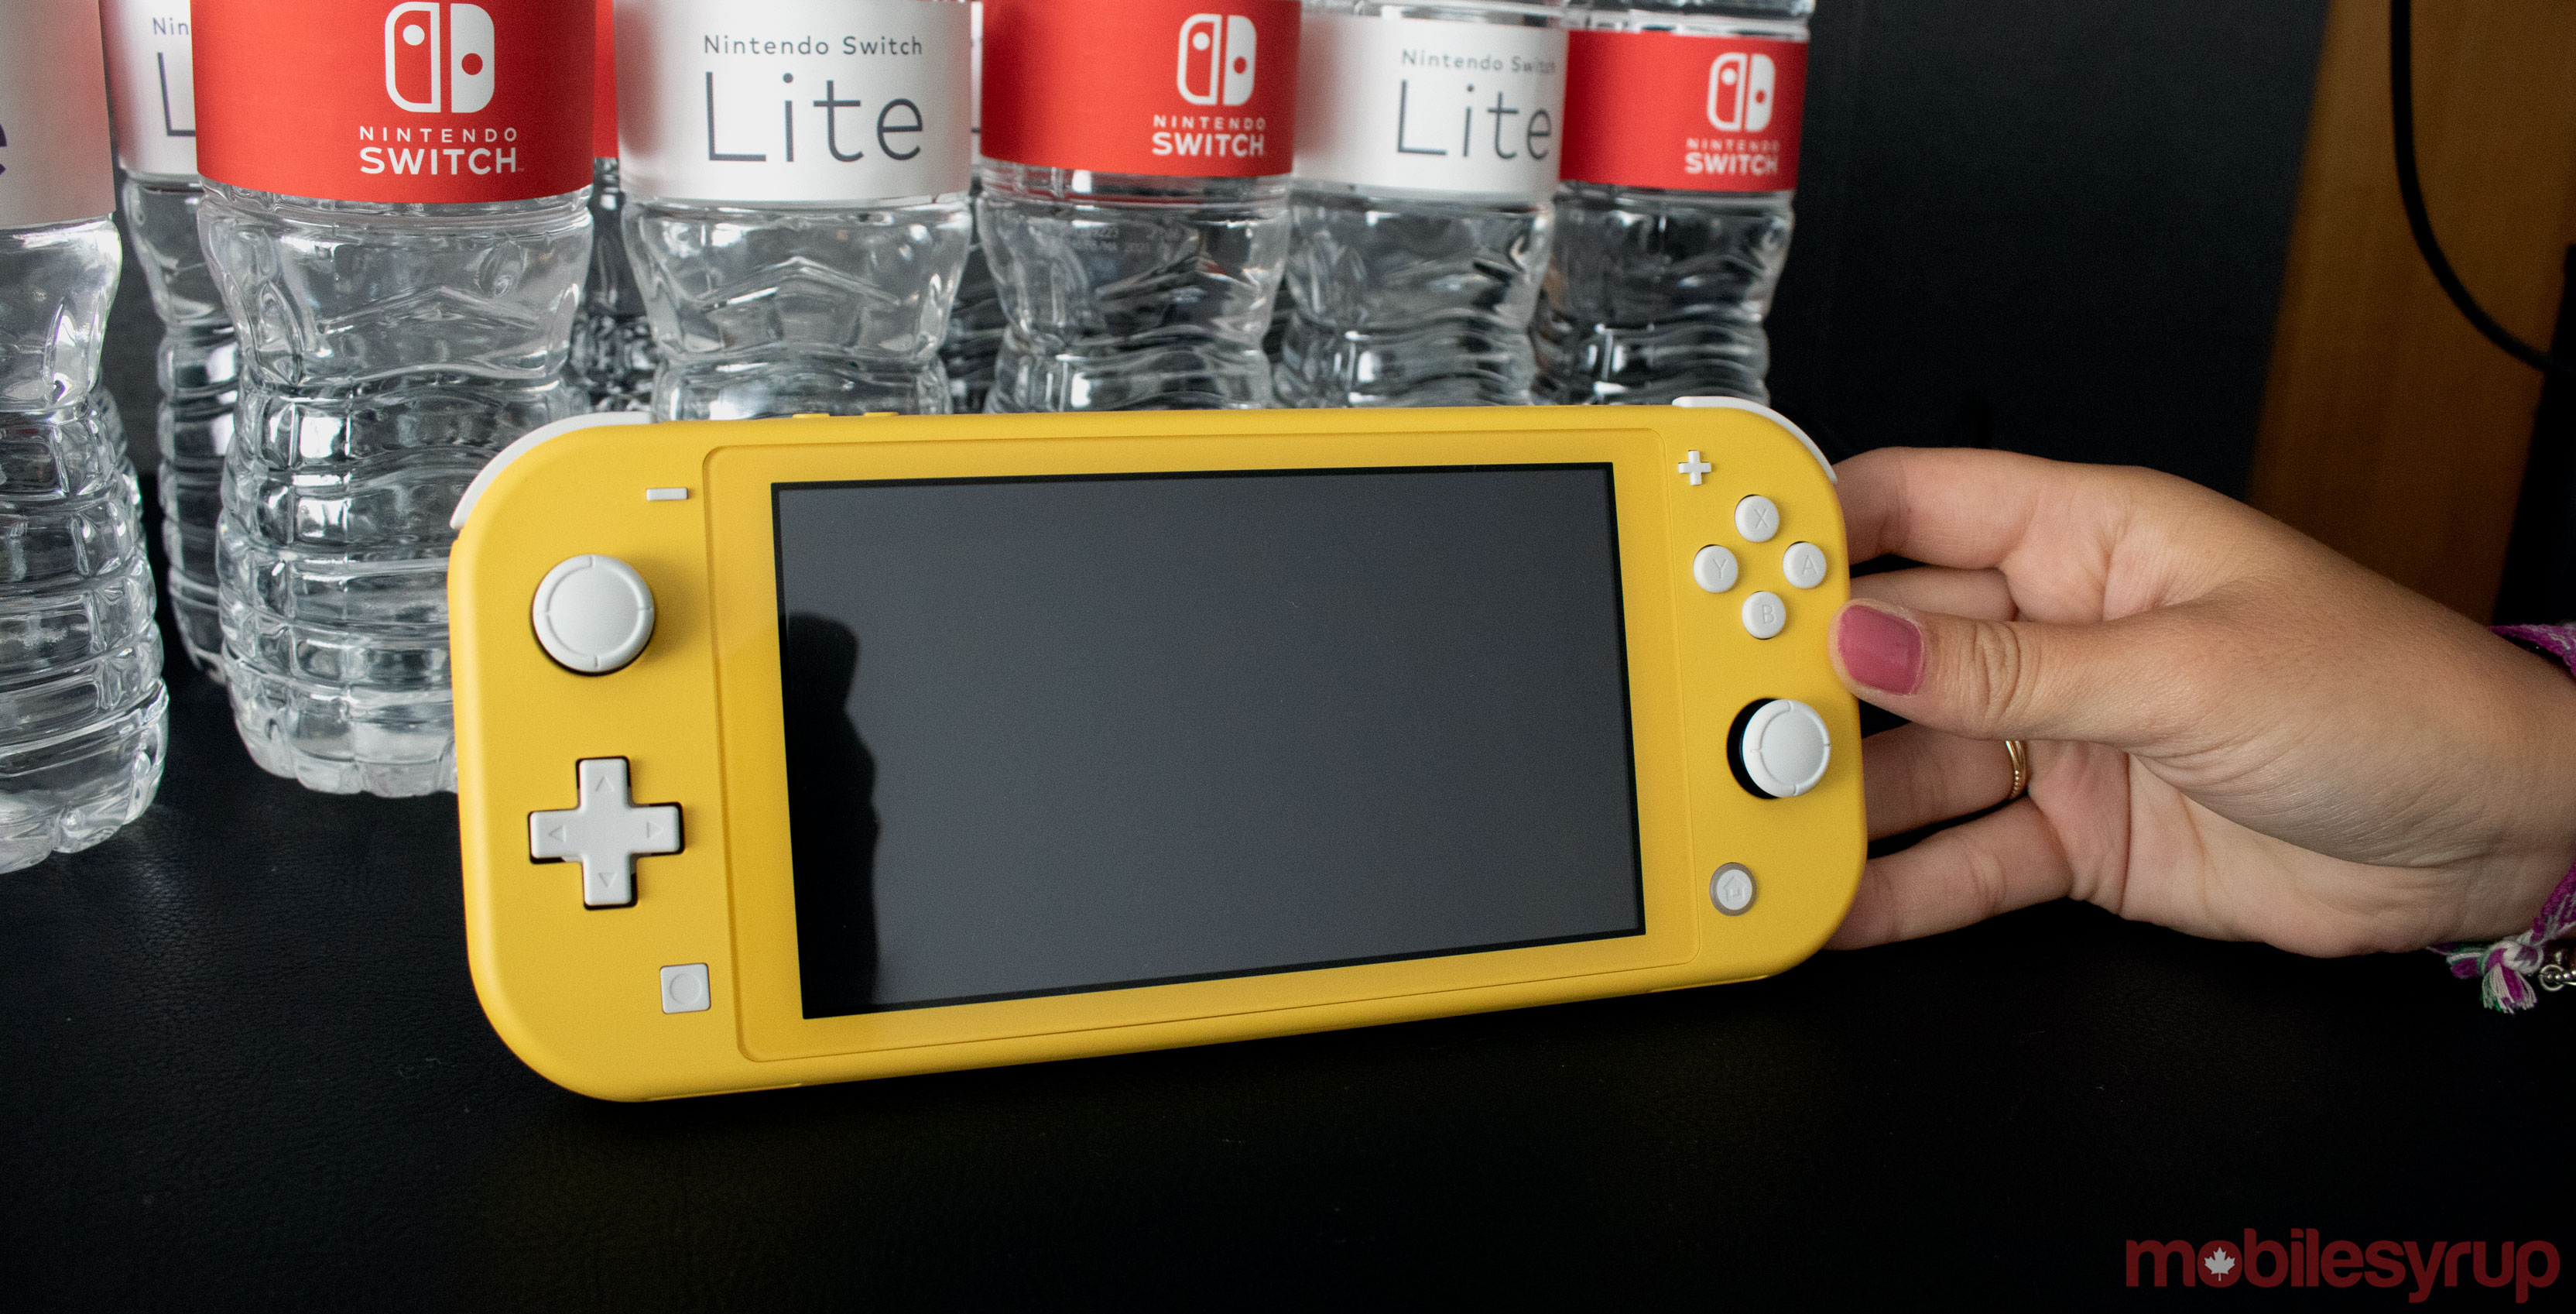 vr headset for switch lite